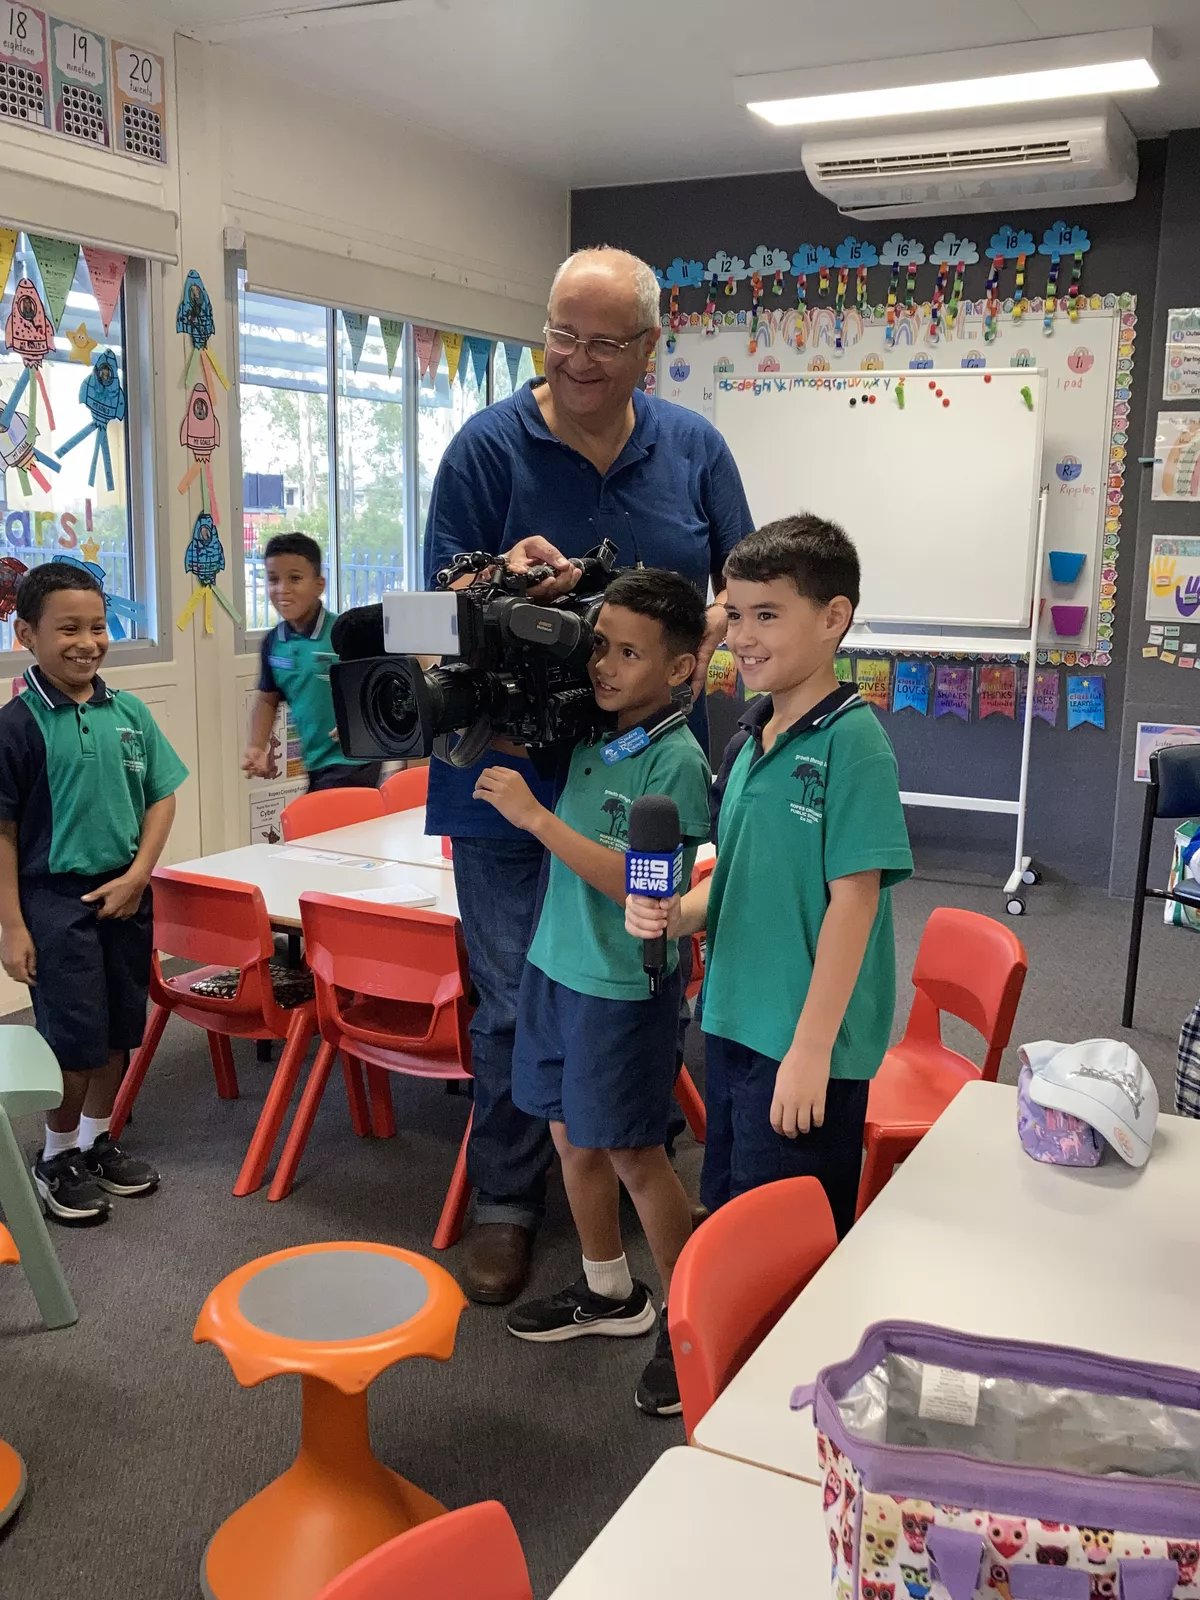 Students from Ropes Crossing Public School take over Channel 9 News' camera and microphone